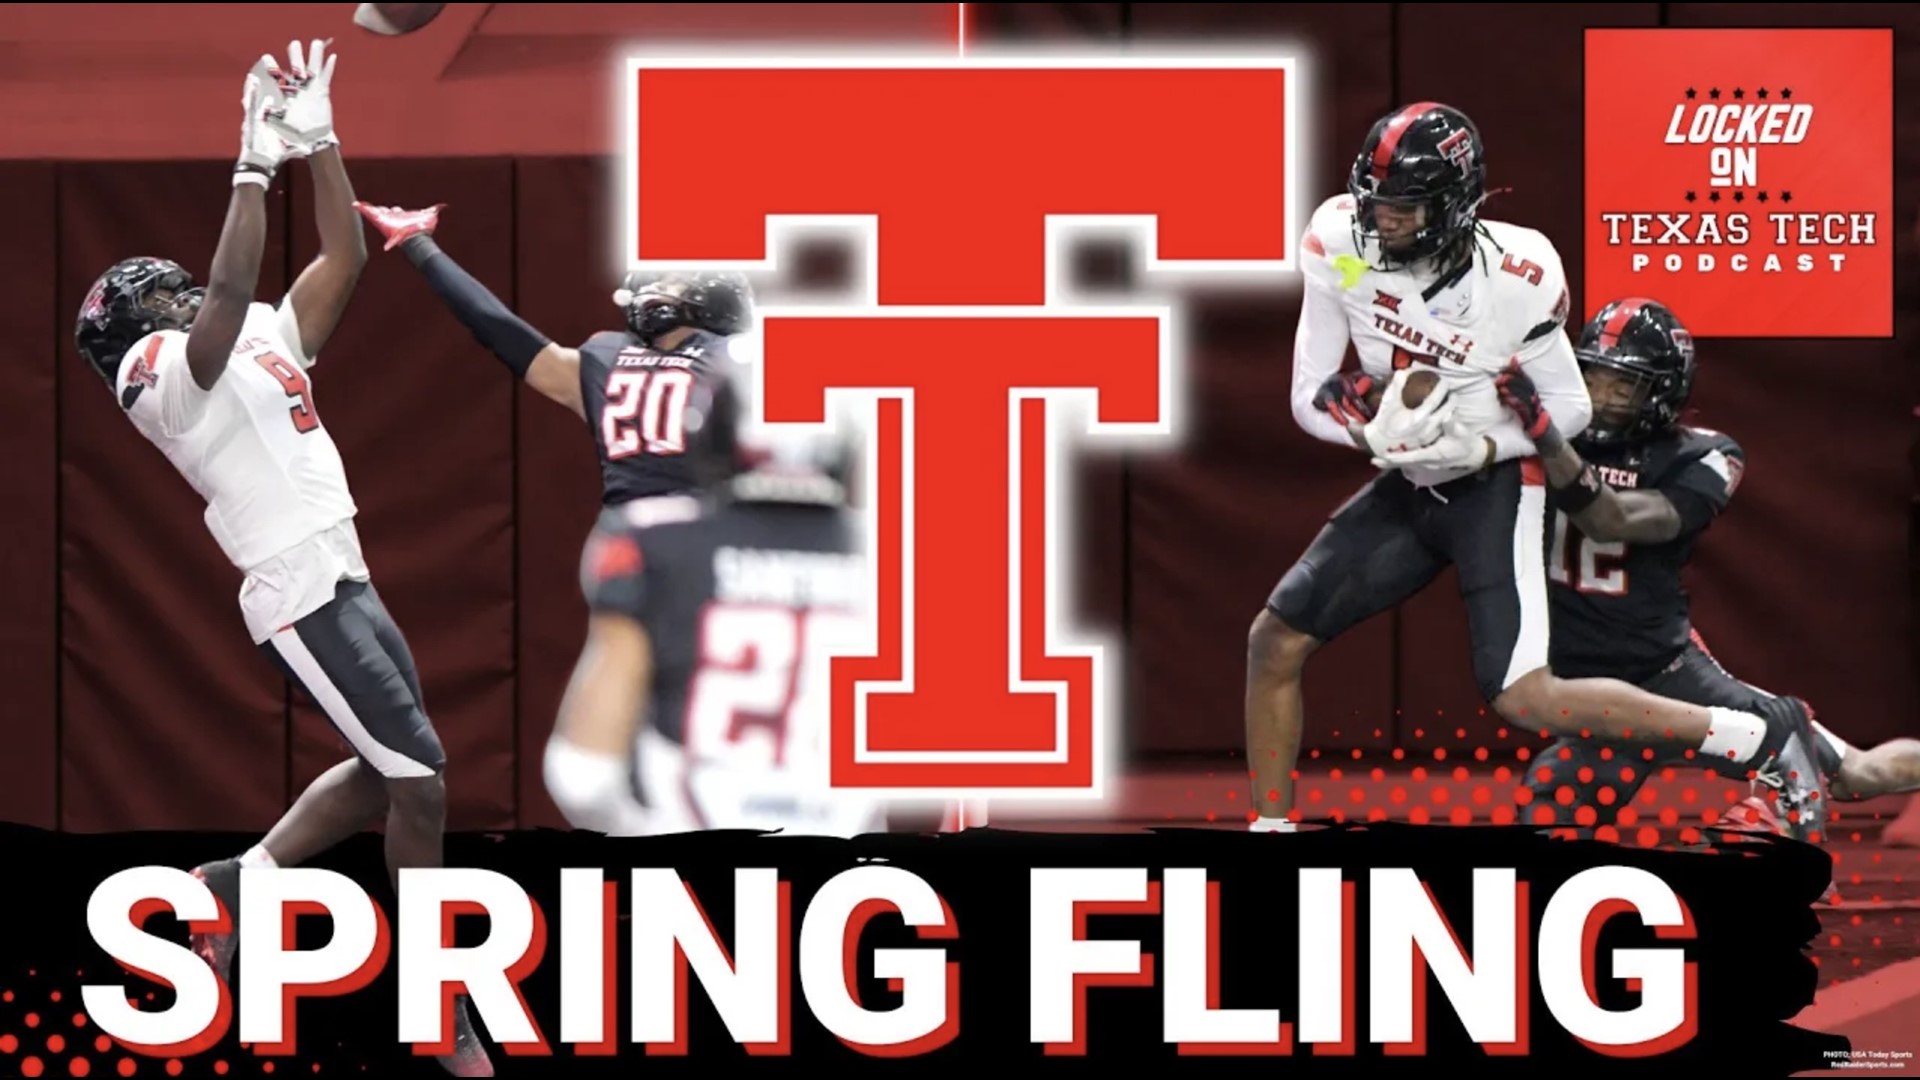 Today from Lubbock, TX, on Locked On Texas Tech:

- on to the fall
- spring standouts
- QB2 would be...